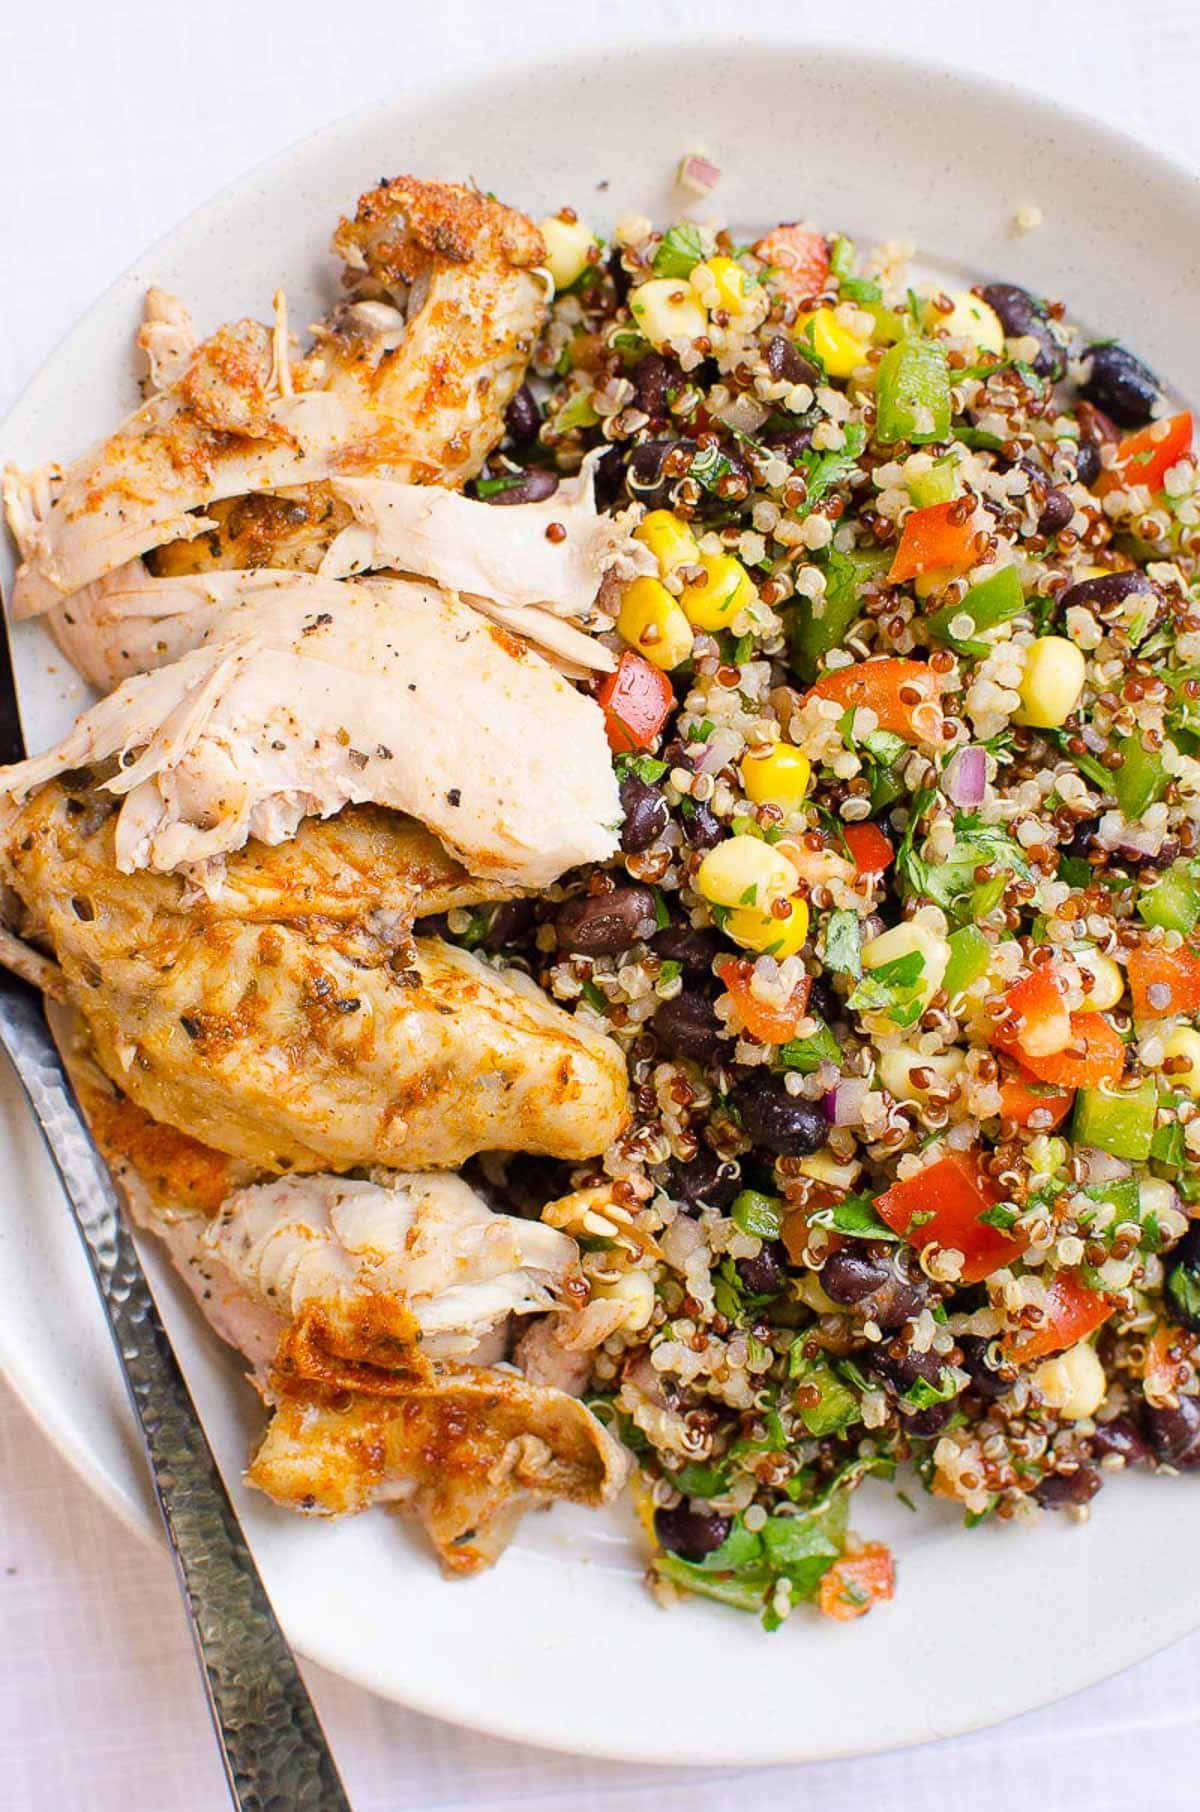 Quinoa salad served with chicken on a plate.